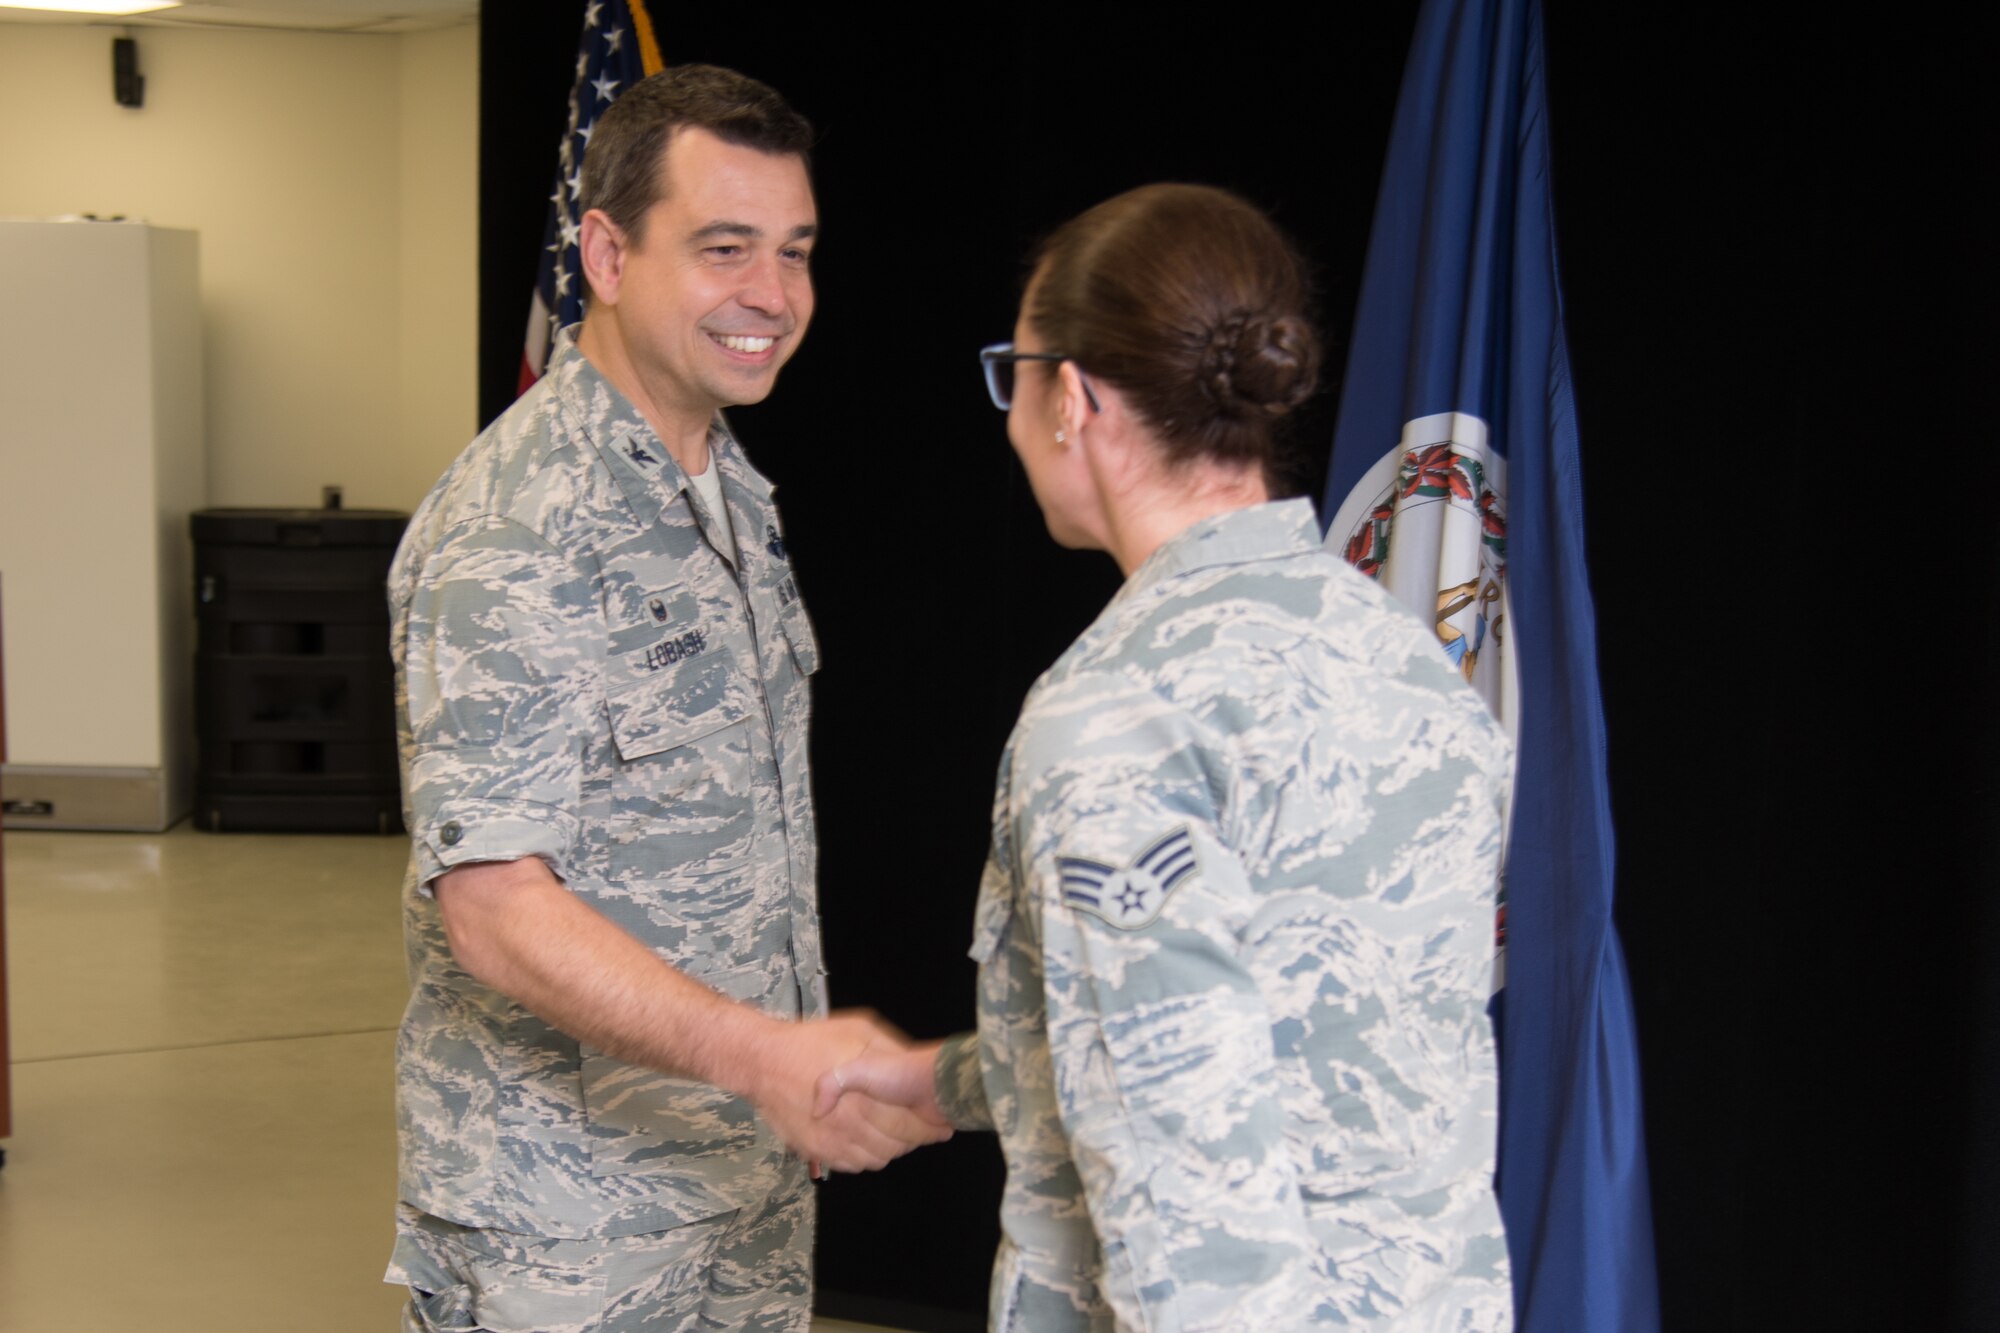 192nd Fighter Wing personnel apprentice wins Air Force-level award